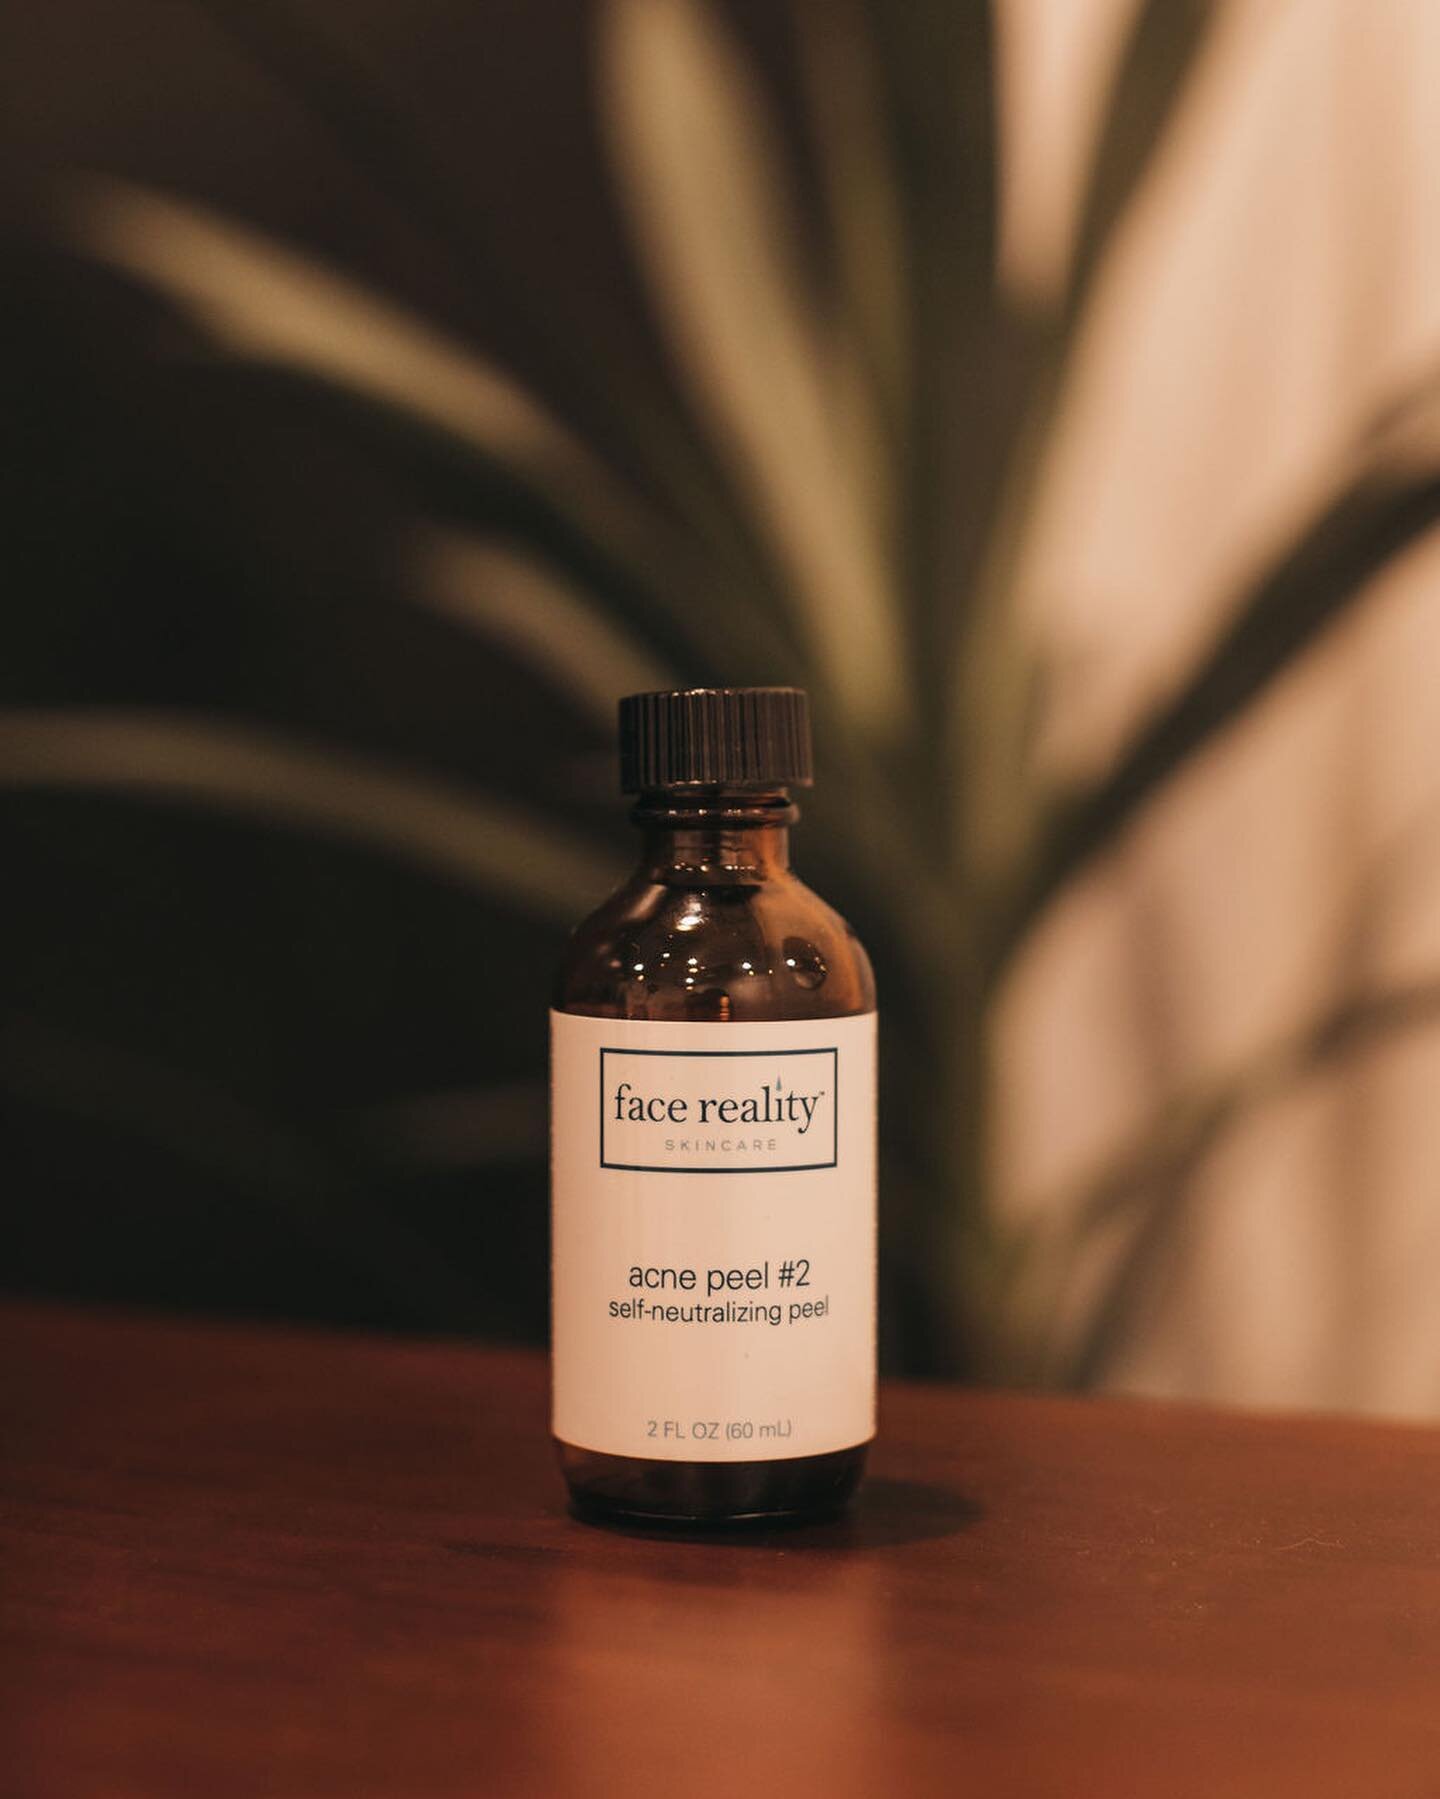 Curious about Acne Treatments? We carry Face Reality at @sloskinstudio and use their peels to help clear acne of all kinds. I can set you up on a well rounded skincare routine with active ingredients to target your specific needs. 

Swipe for some re